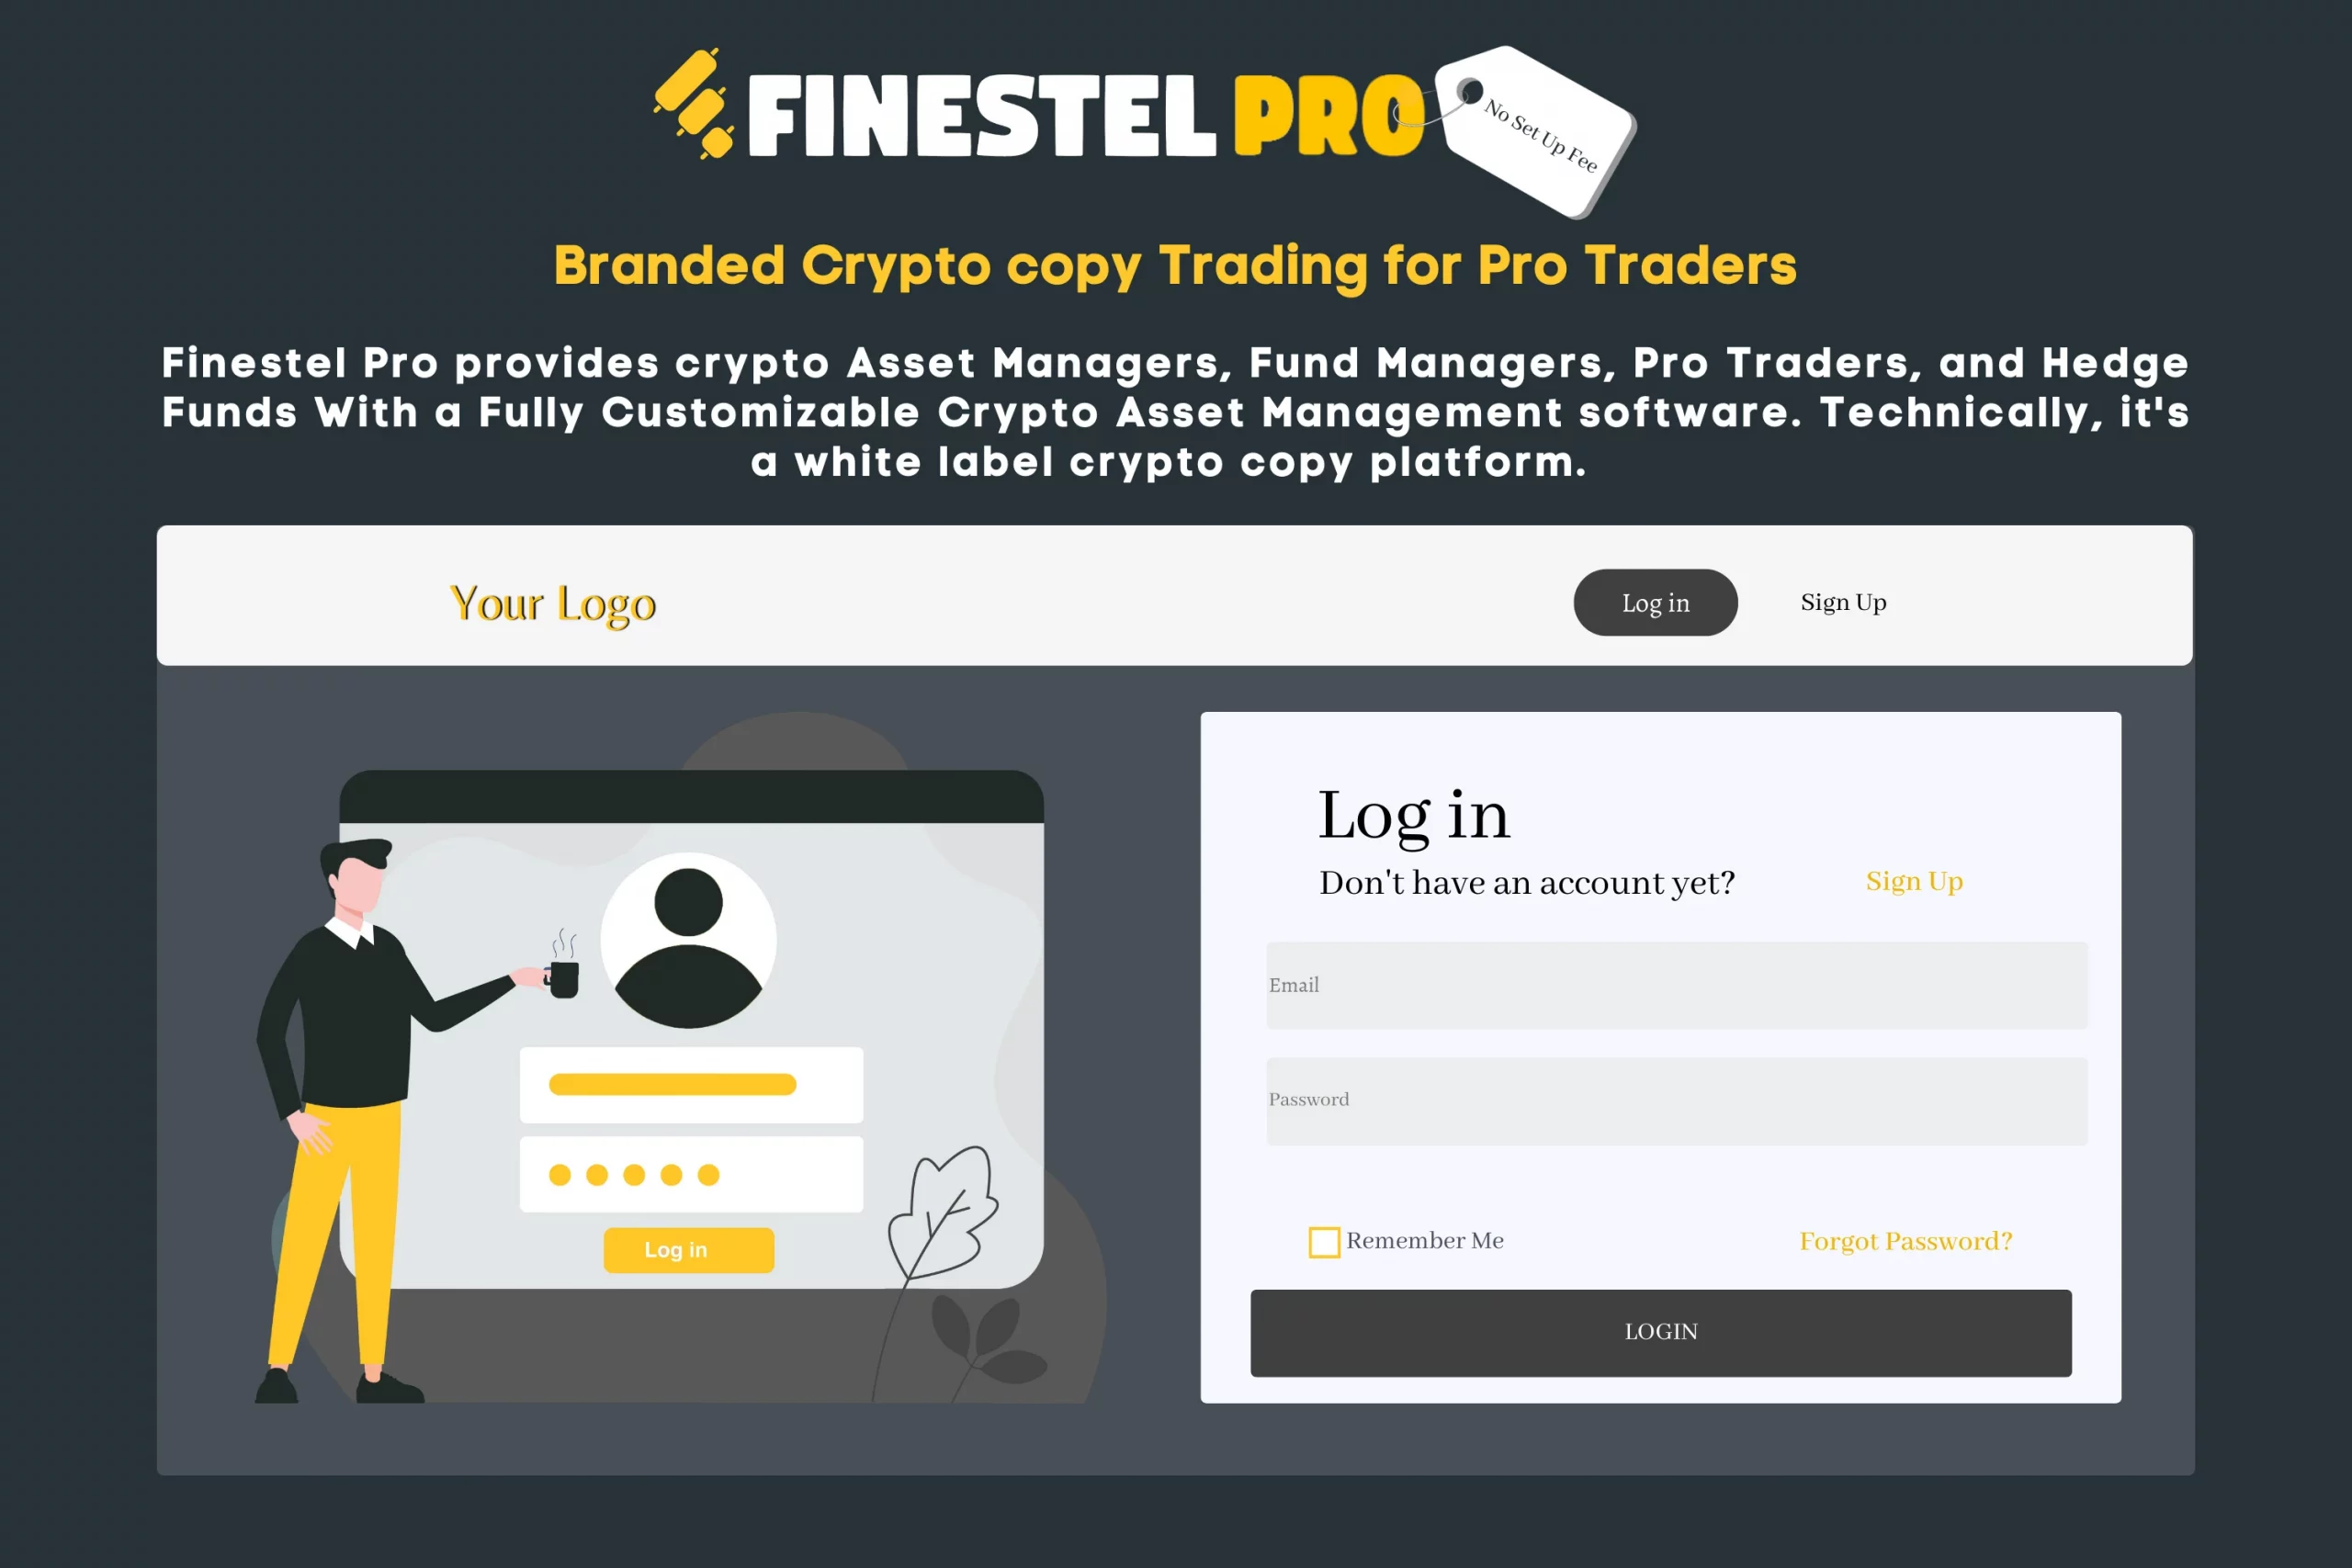 Finestel Pro demo page reading "Your